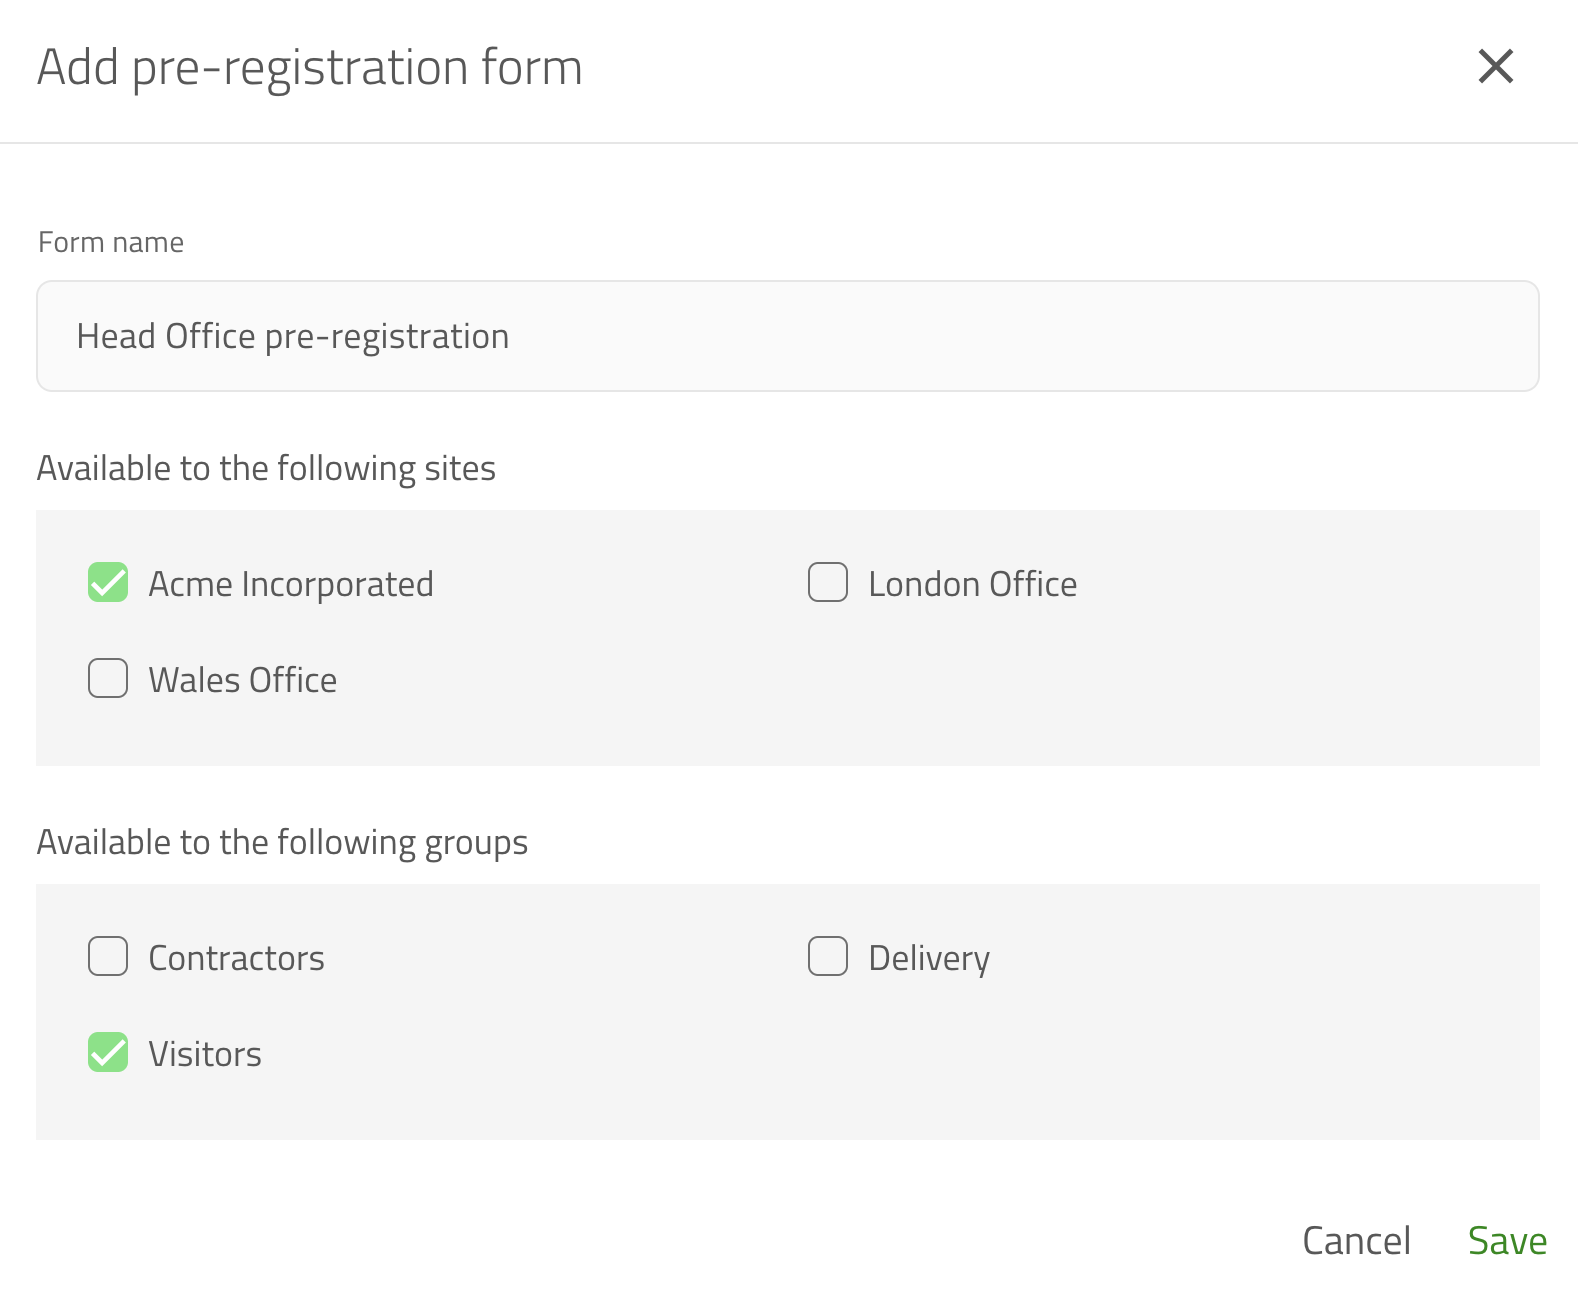 The add form modal filled out to demonstrate how a form can be added